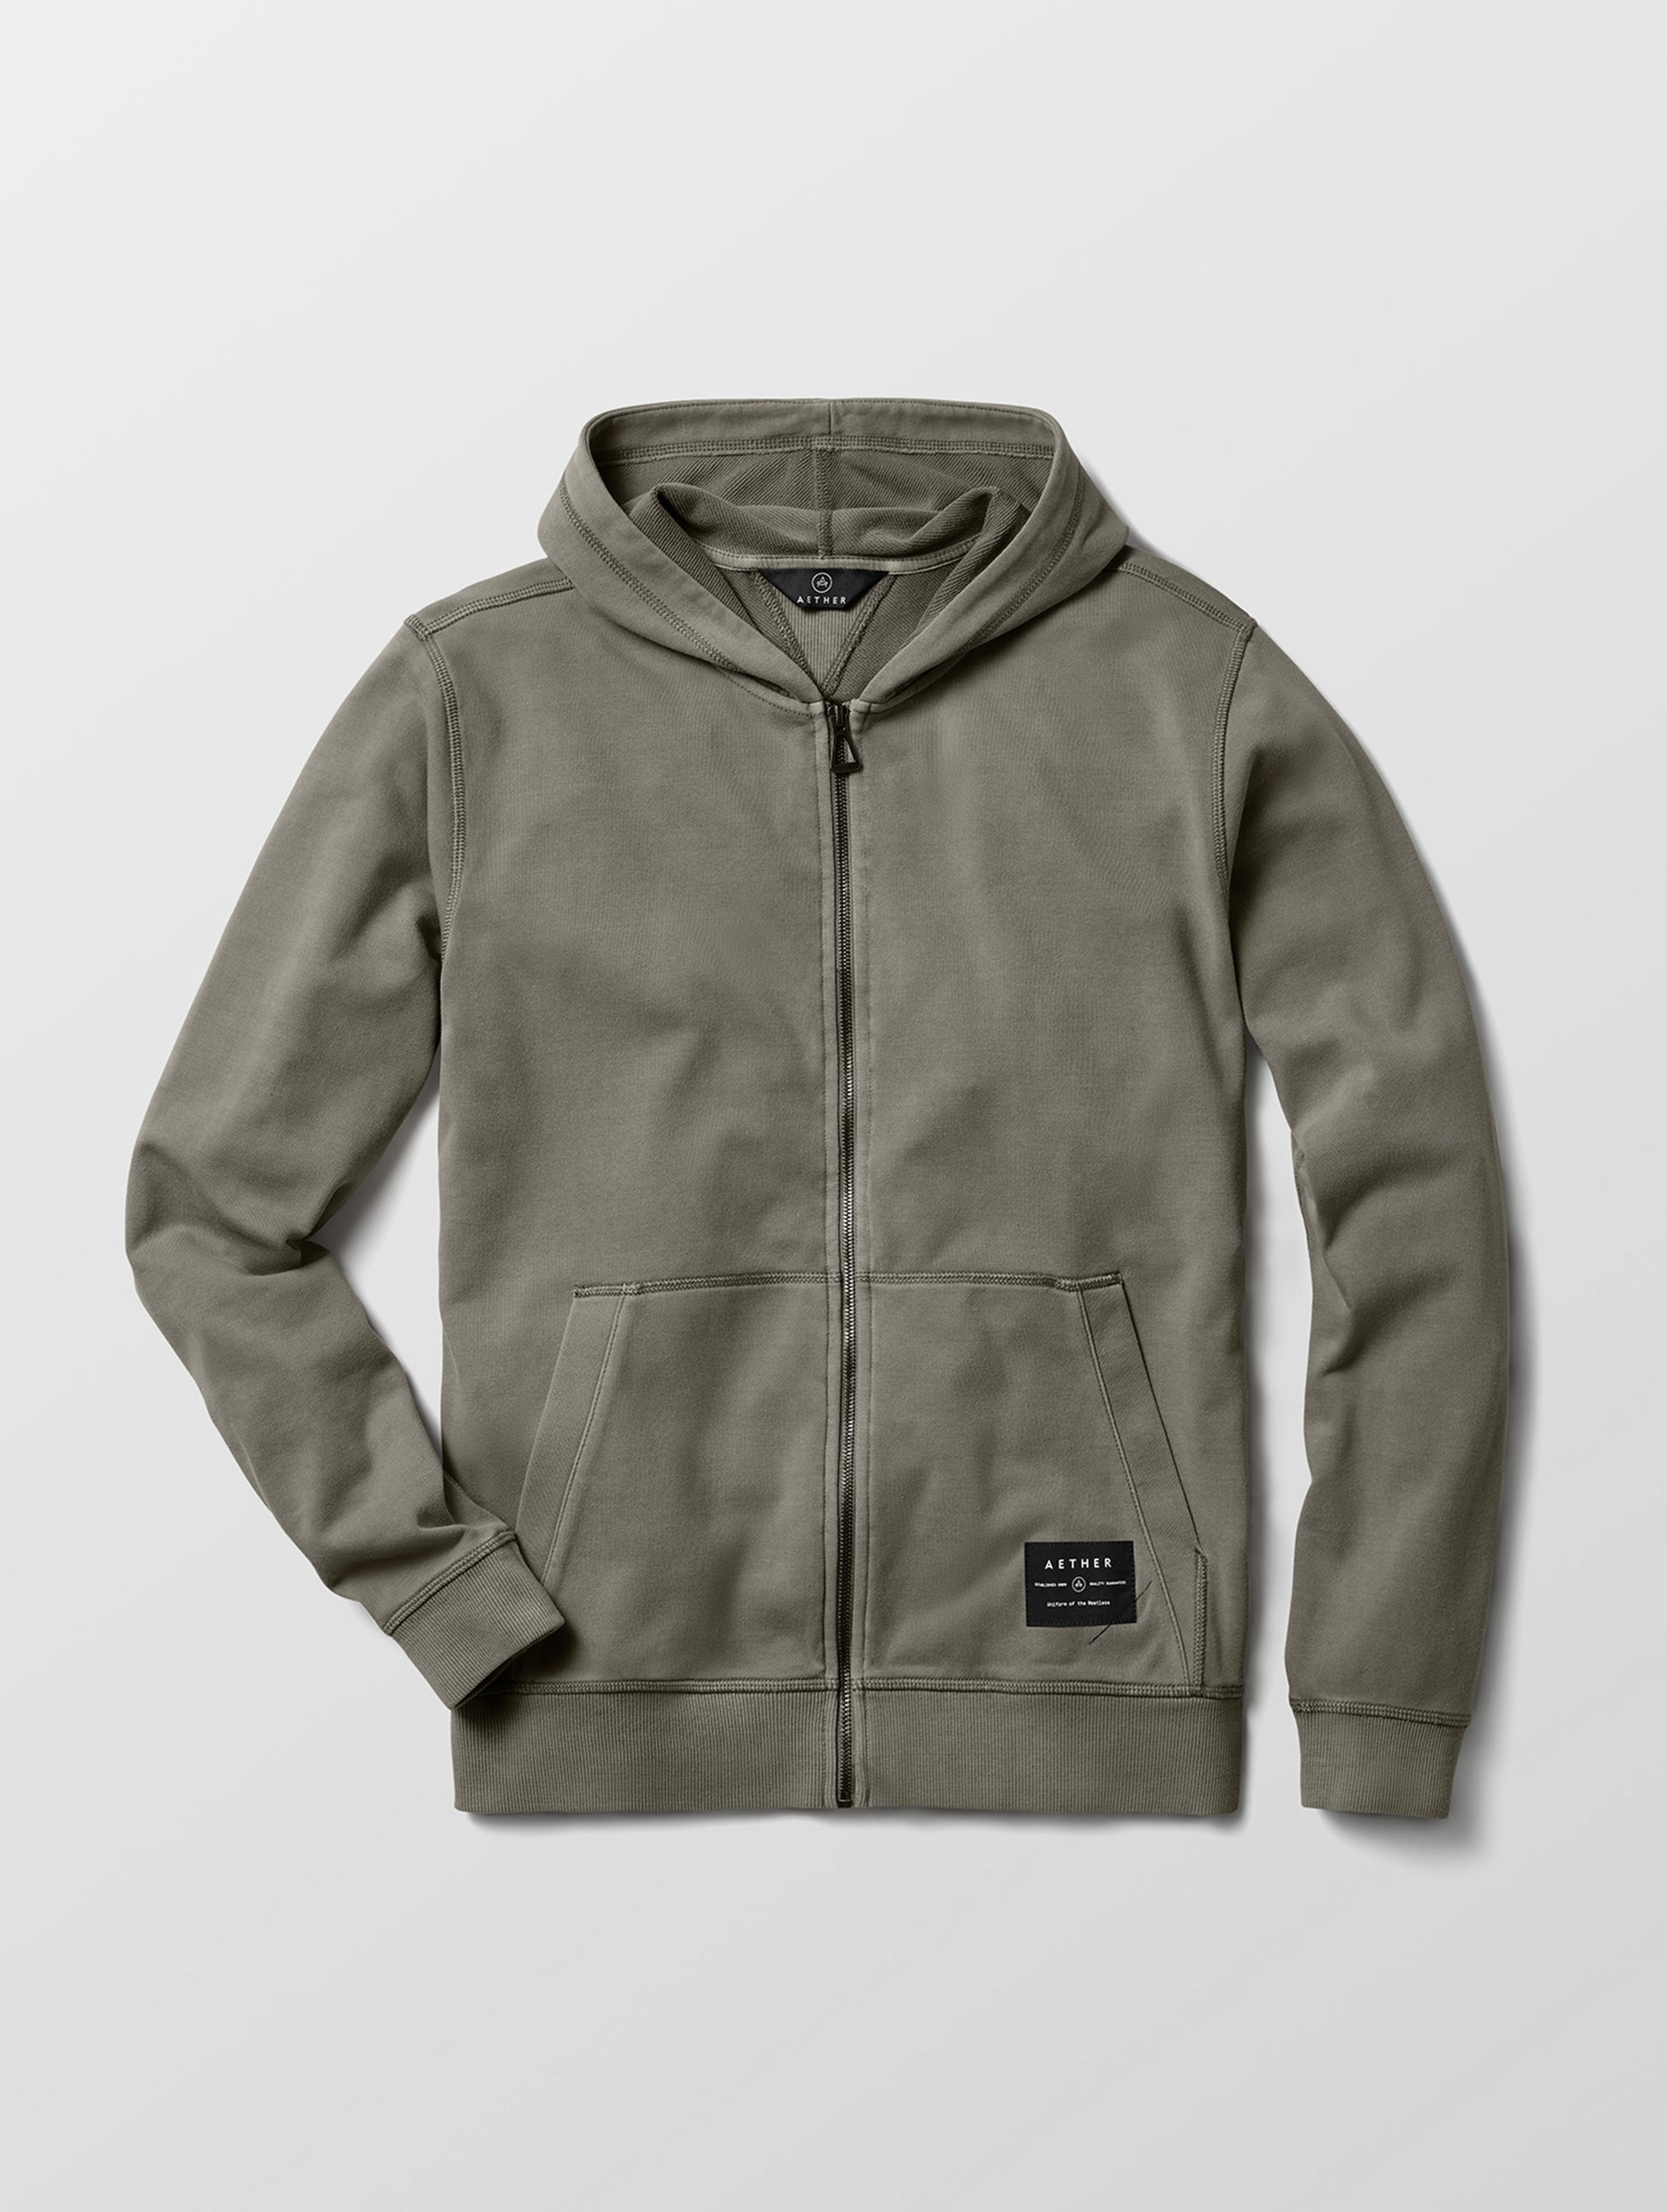 Green full-zip hoodie from AETHER Apparel